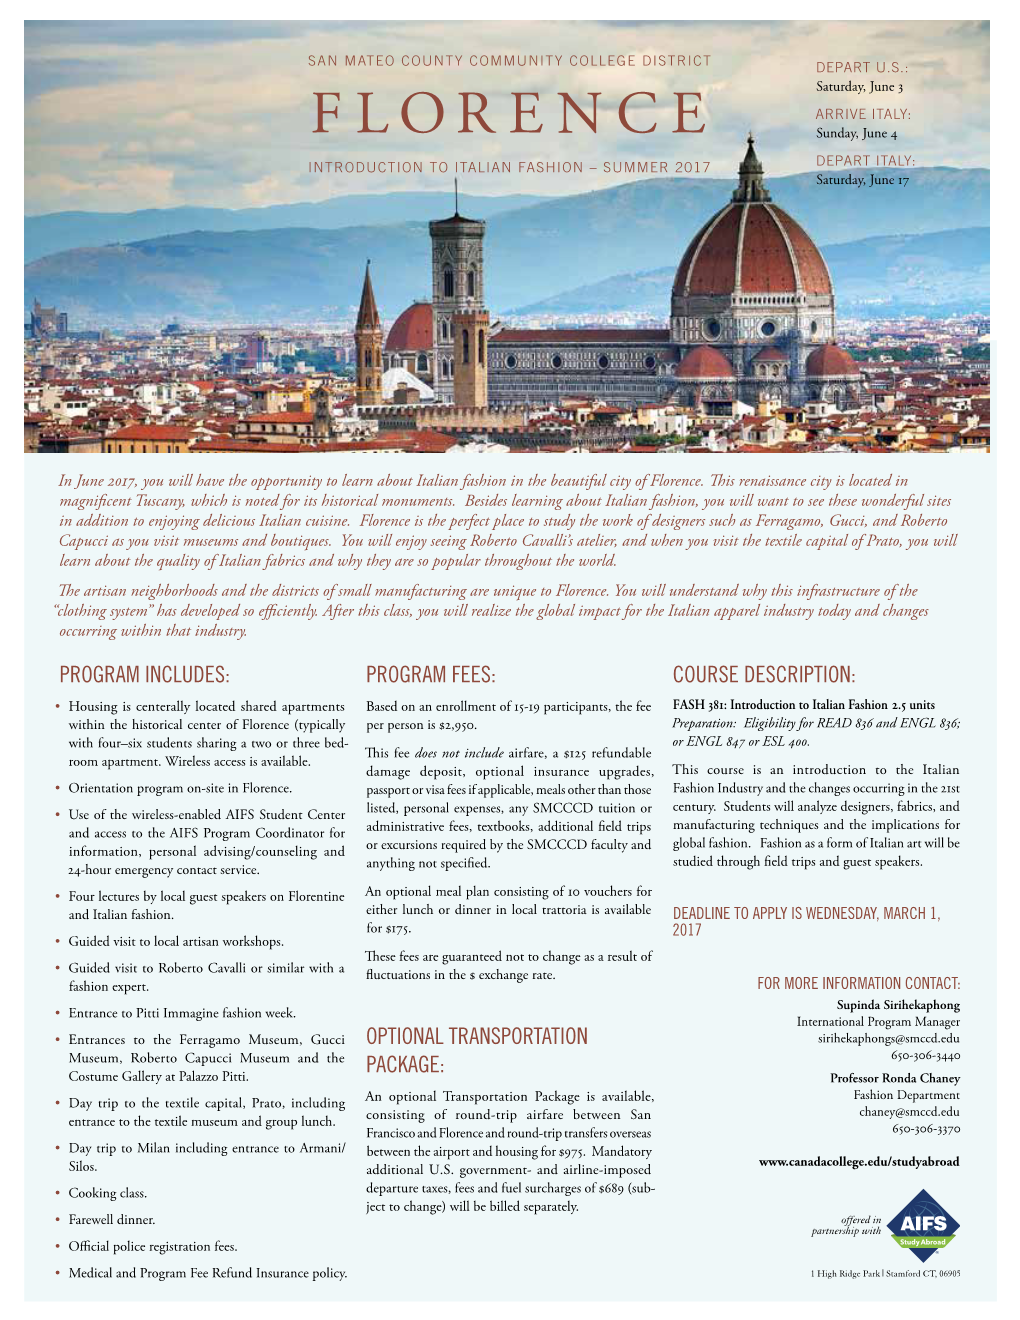 FLORENCE Sunday, June 4 INTRODUCTION to ITALIAN FASHION – SUMMER 2017 DEPART ITALY: Saturday, June 17